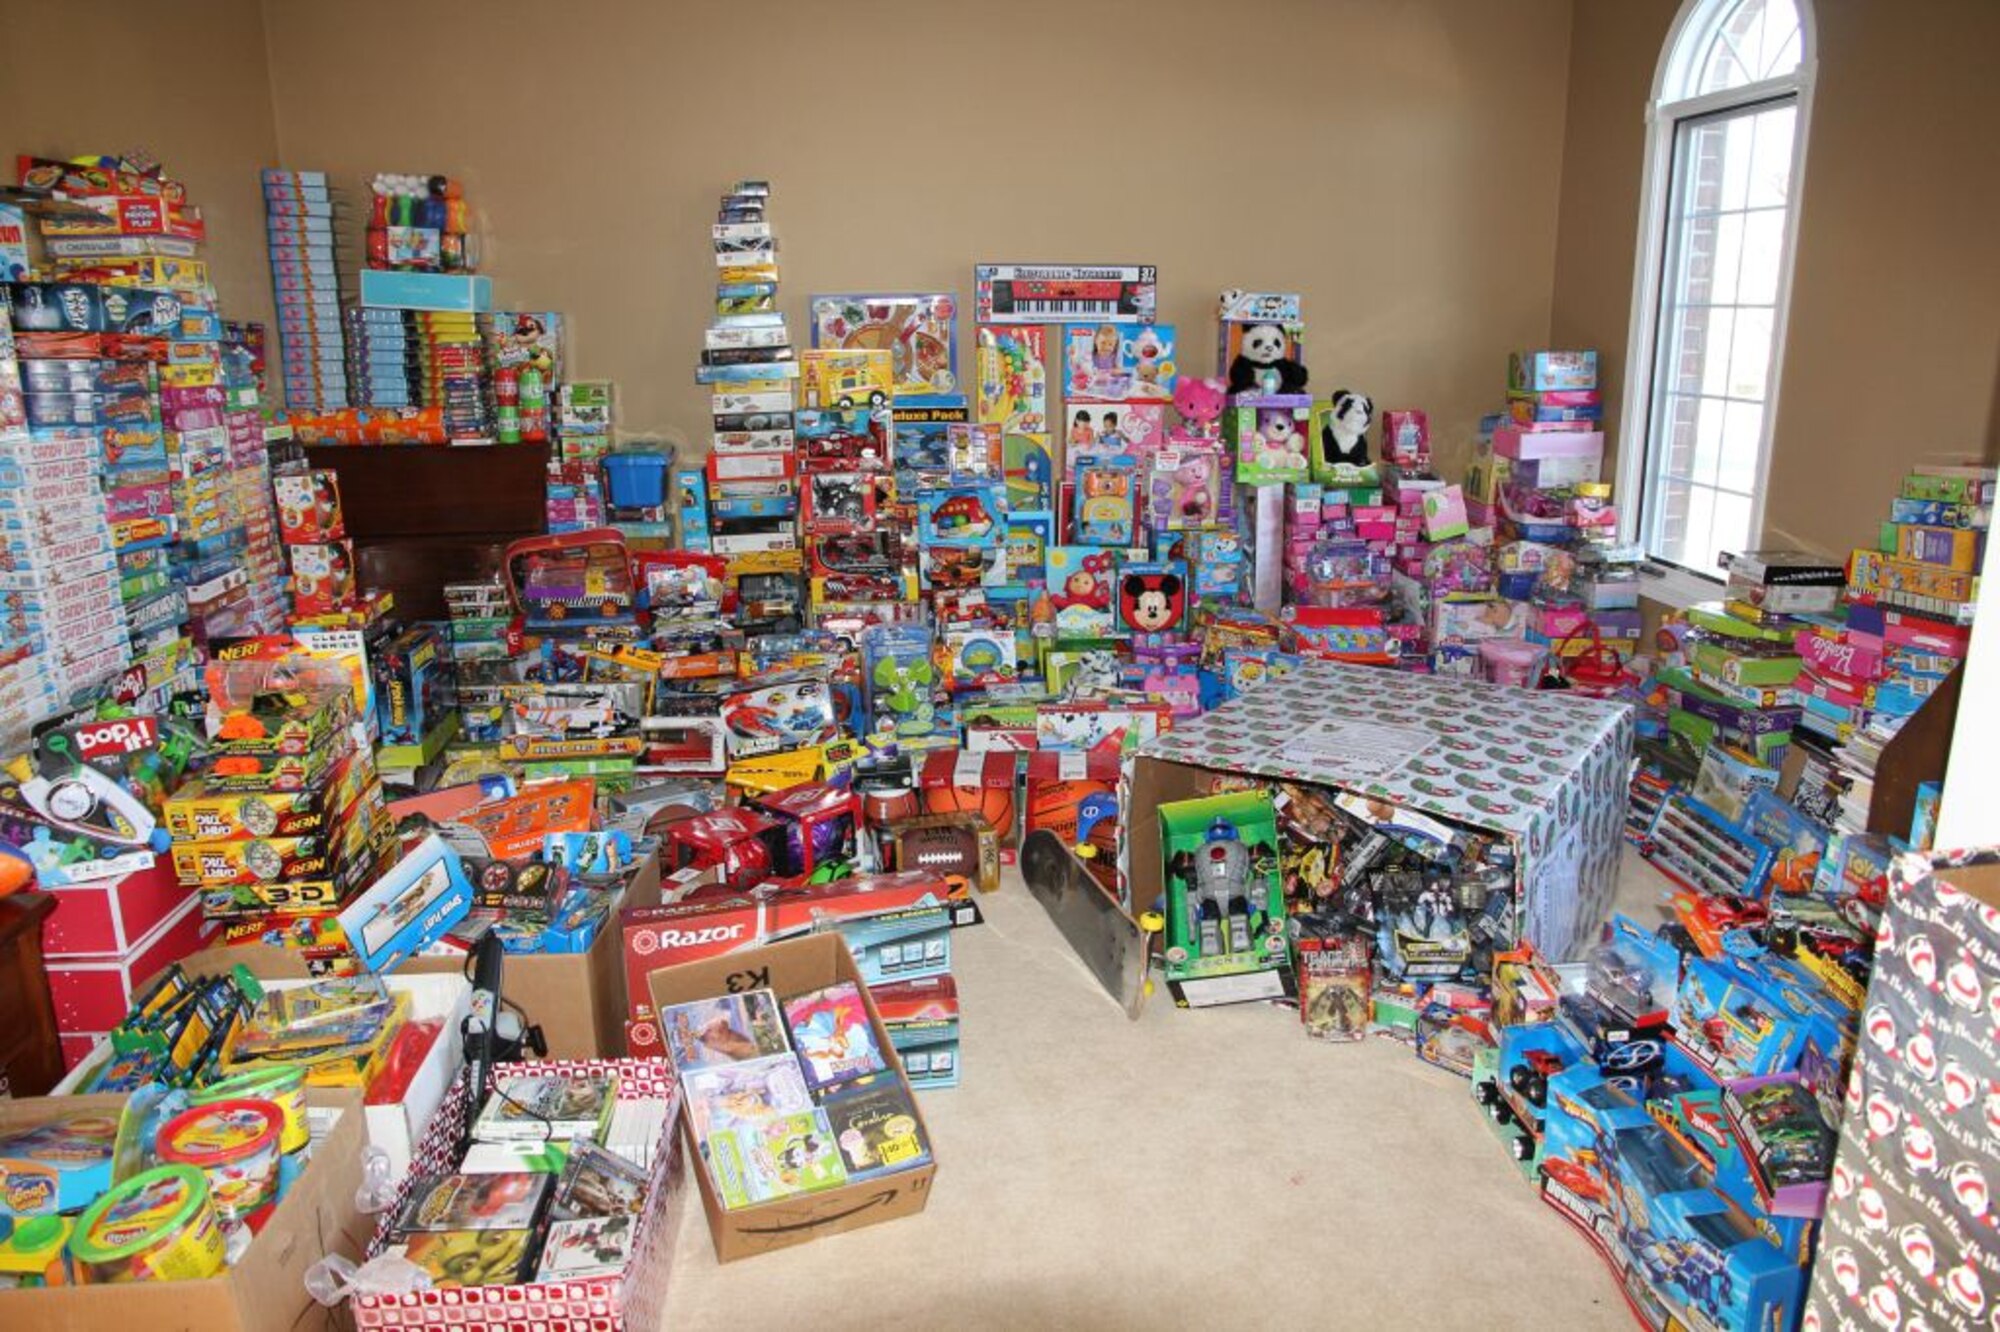 The local Air Force Sergeants Association chapter is collecting holiday gifts for patients at the University of New Mexico Children’s Hospital. The toy drive runs through Nov. 30. AFSA needs gifts for kids from infants to age 18. For questions or to arrange toy drop-off, contact Staff Sgt. Kevin Delong at kevin.delong@us.af.mil.